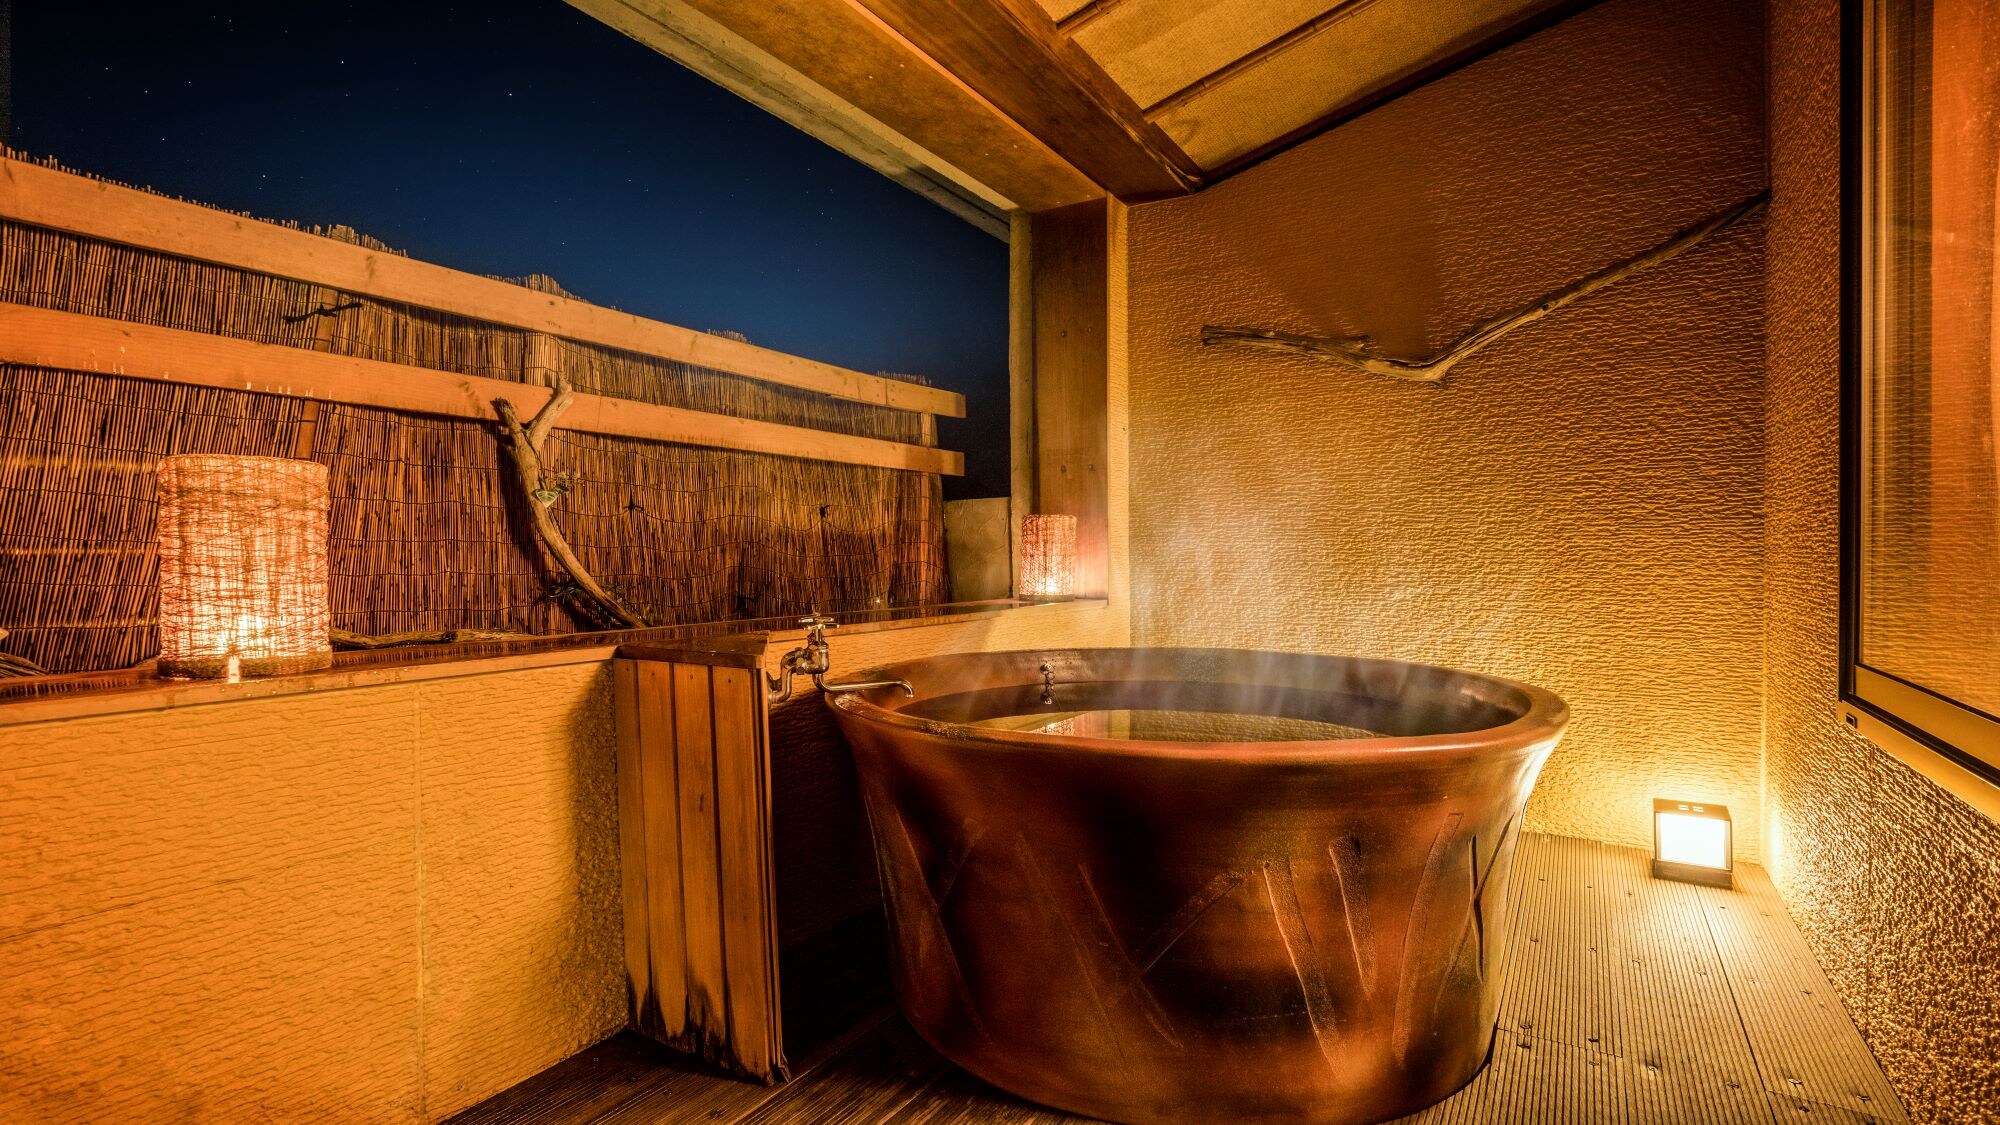 2 Japanese-style rooms with a superior open-air bath * An example of a guest room open-air bath